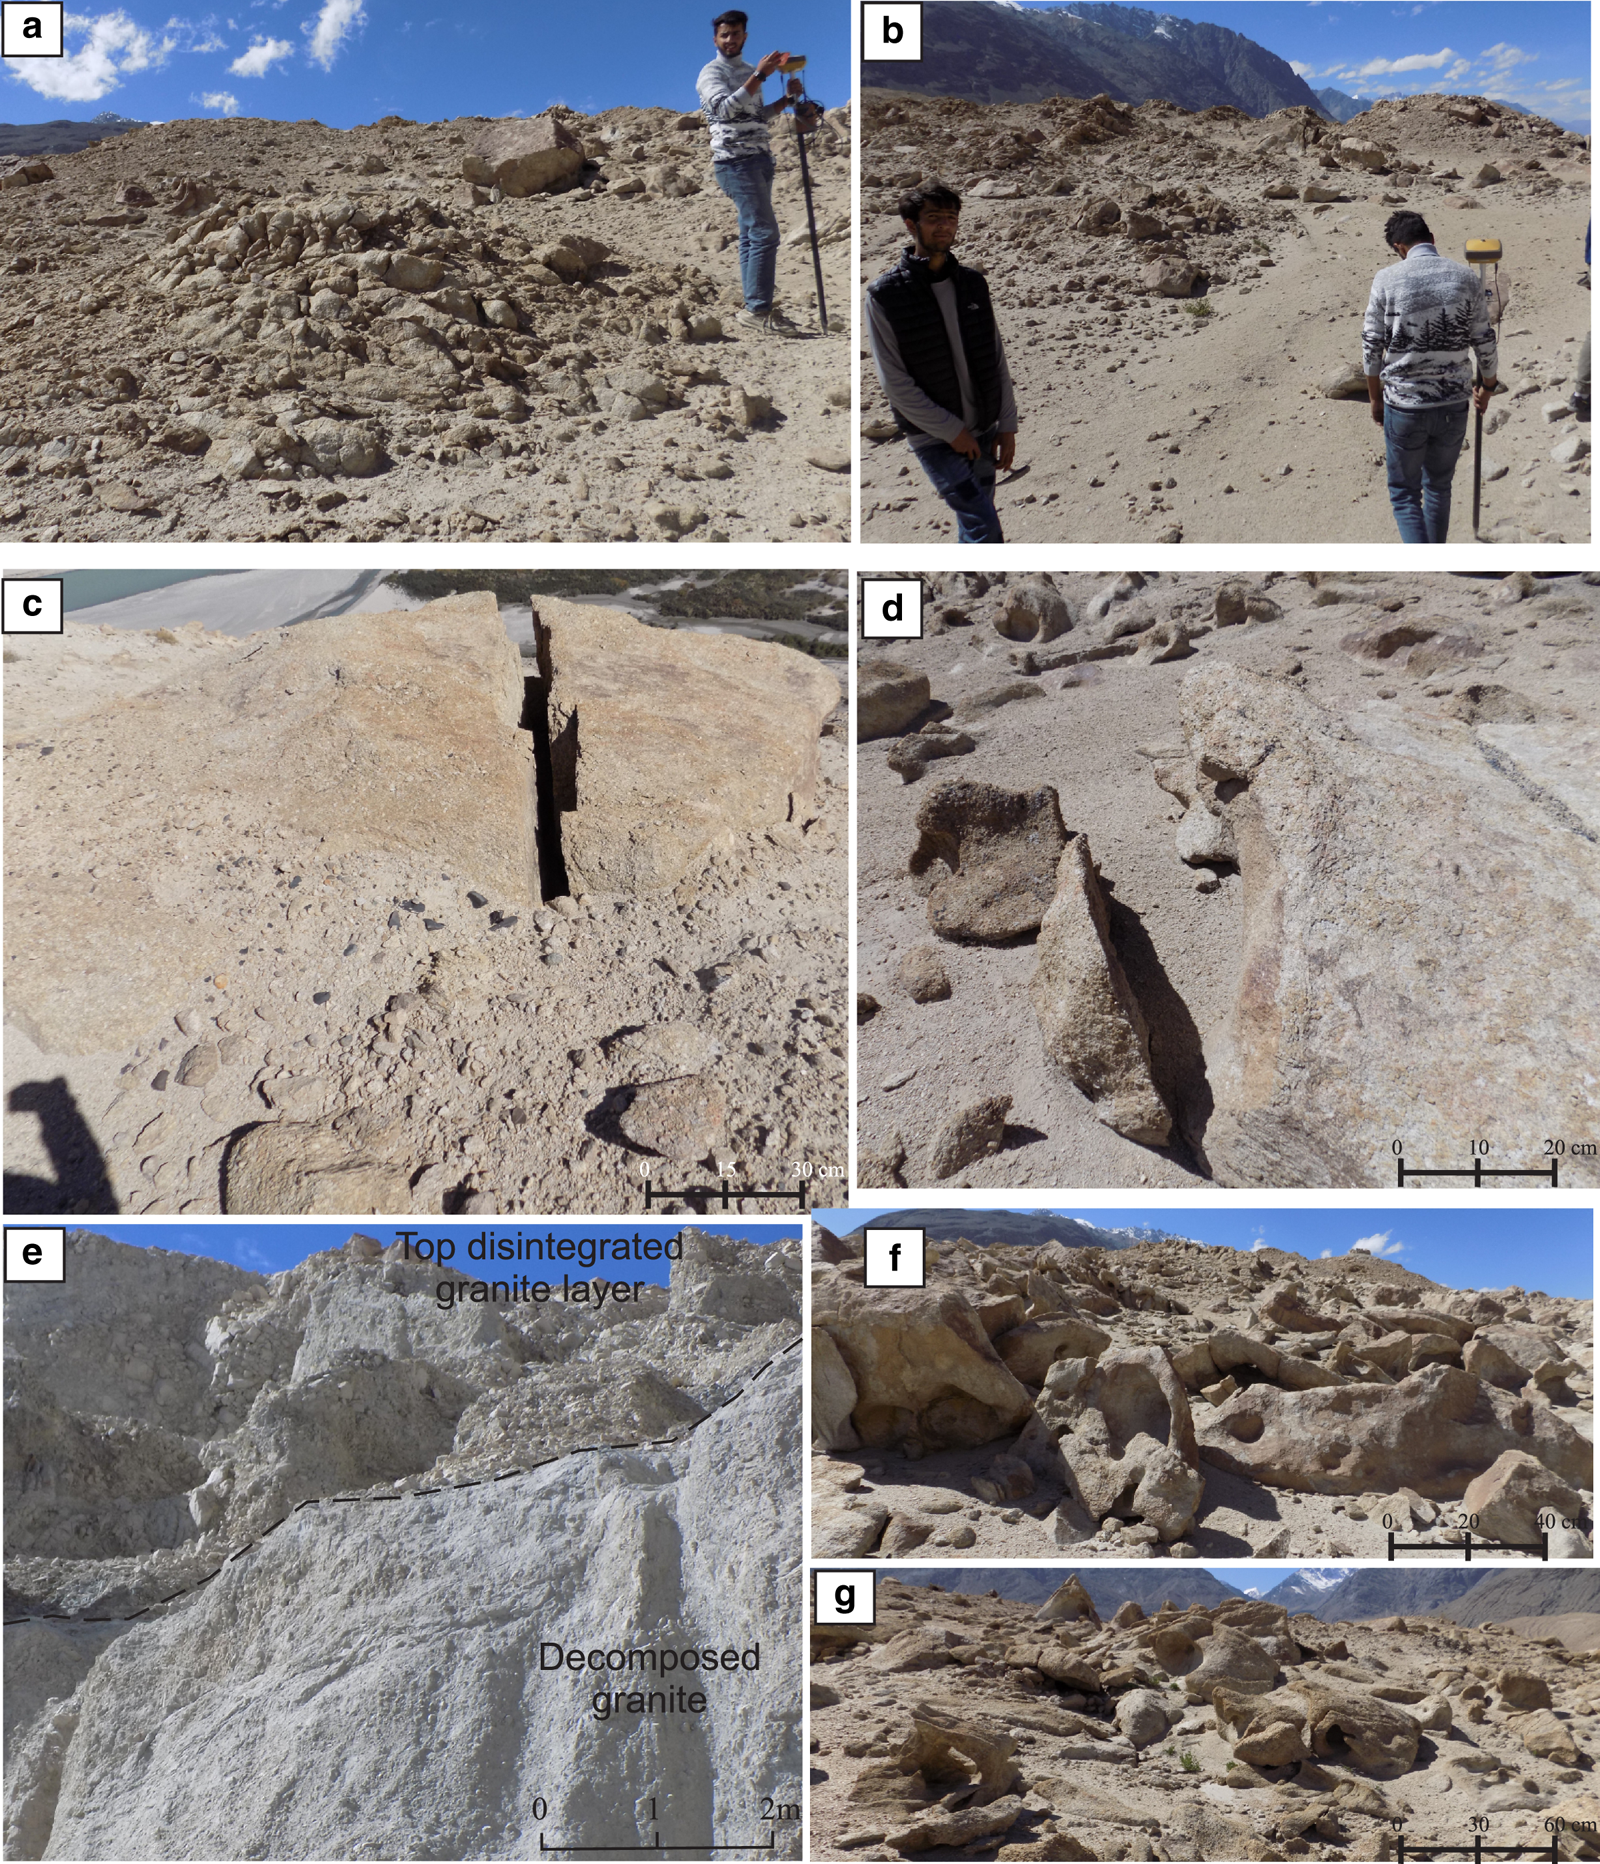 Field photographs showing (a) Outcrop of granitoids at Panamik, Nubra